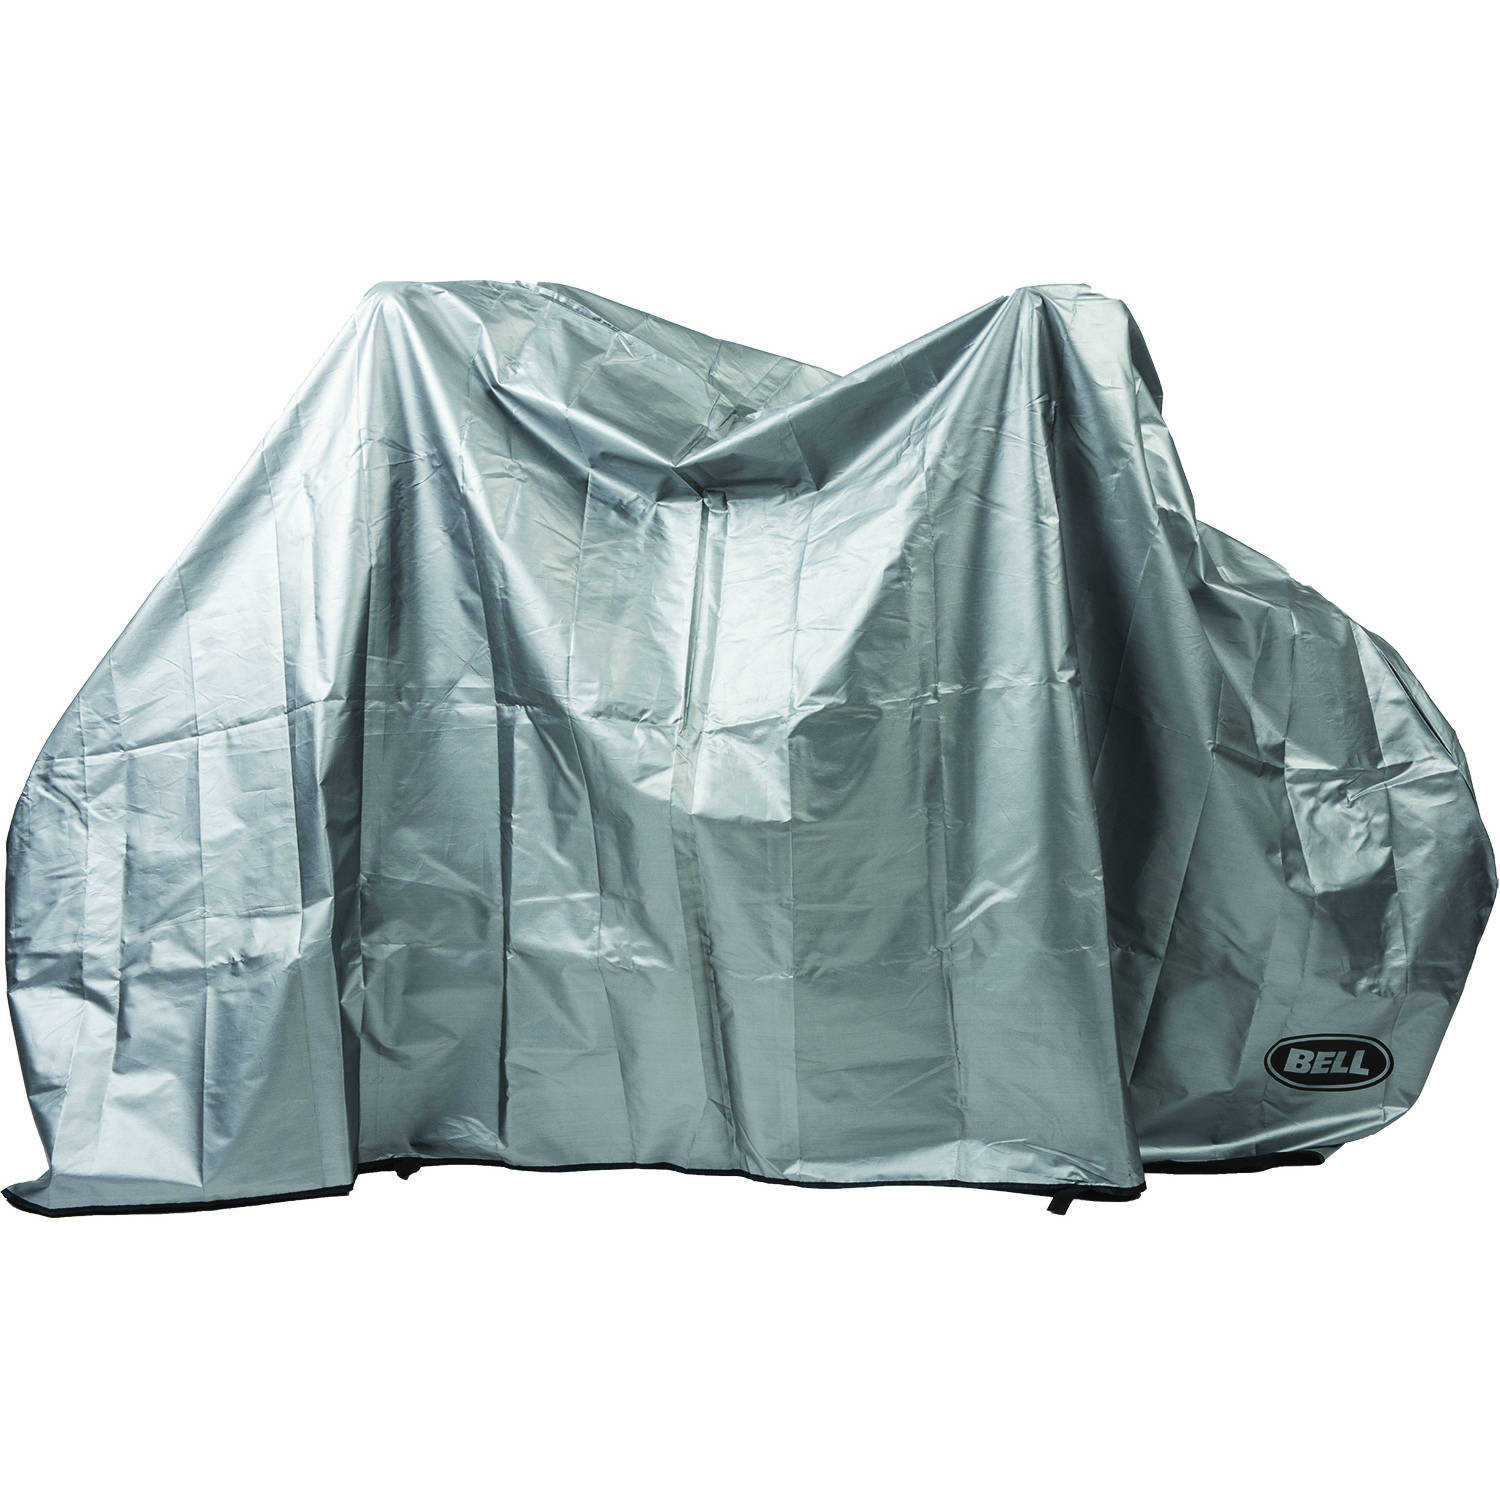 Bell Sports Velocover 500 Bicycle Storage Cover for bikes up to 29', Gray